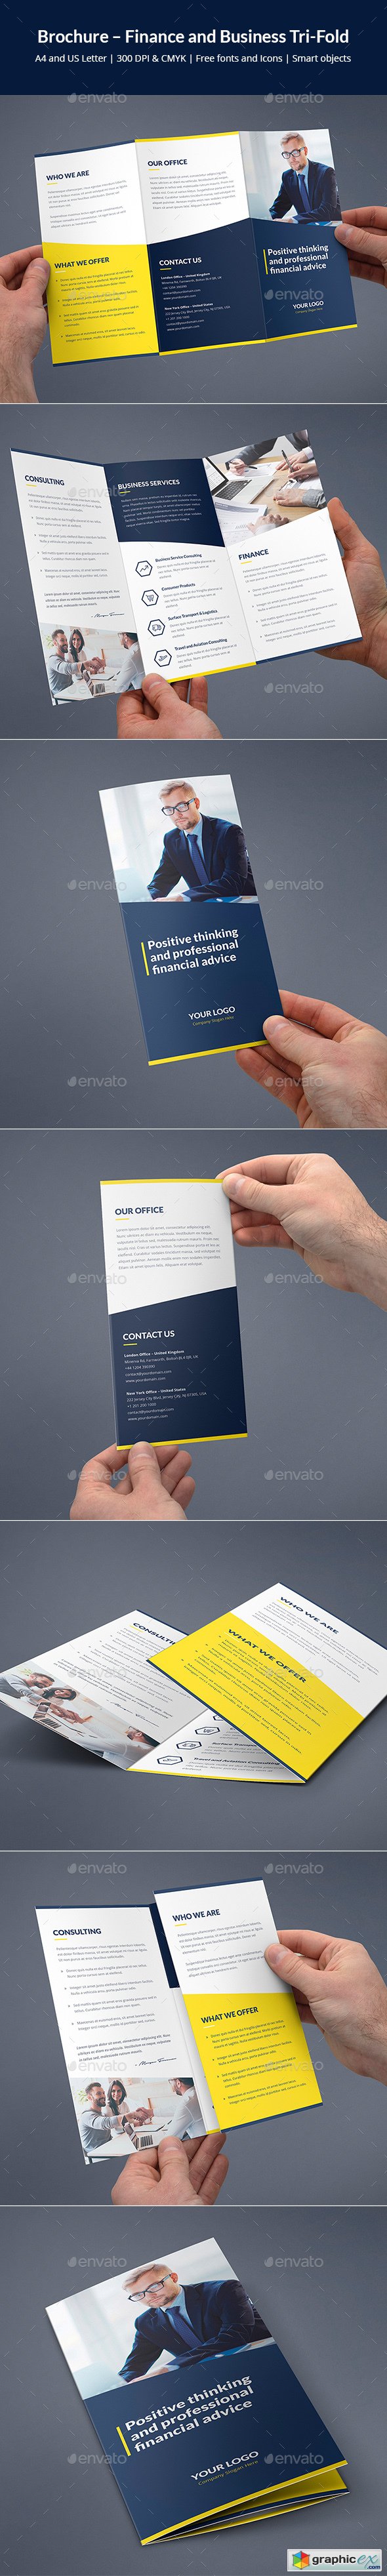 Brochure  Finance and Business Tri-Fold